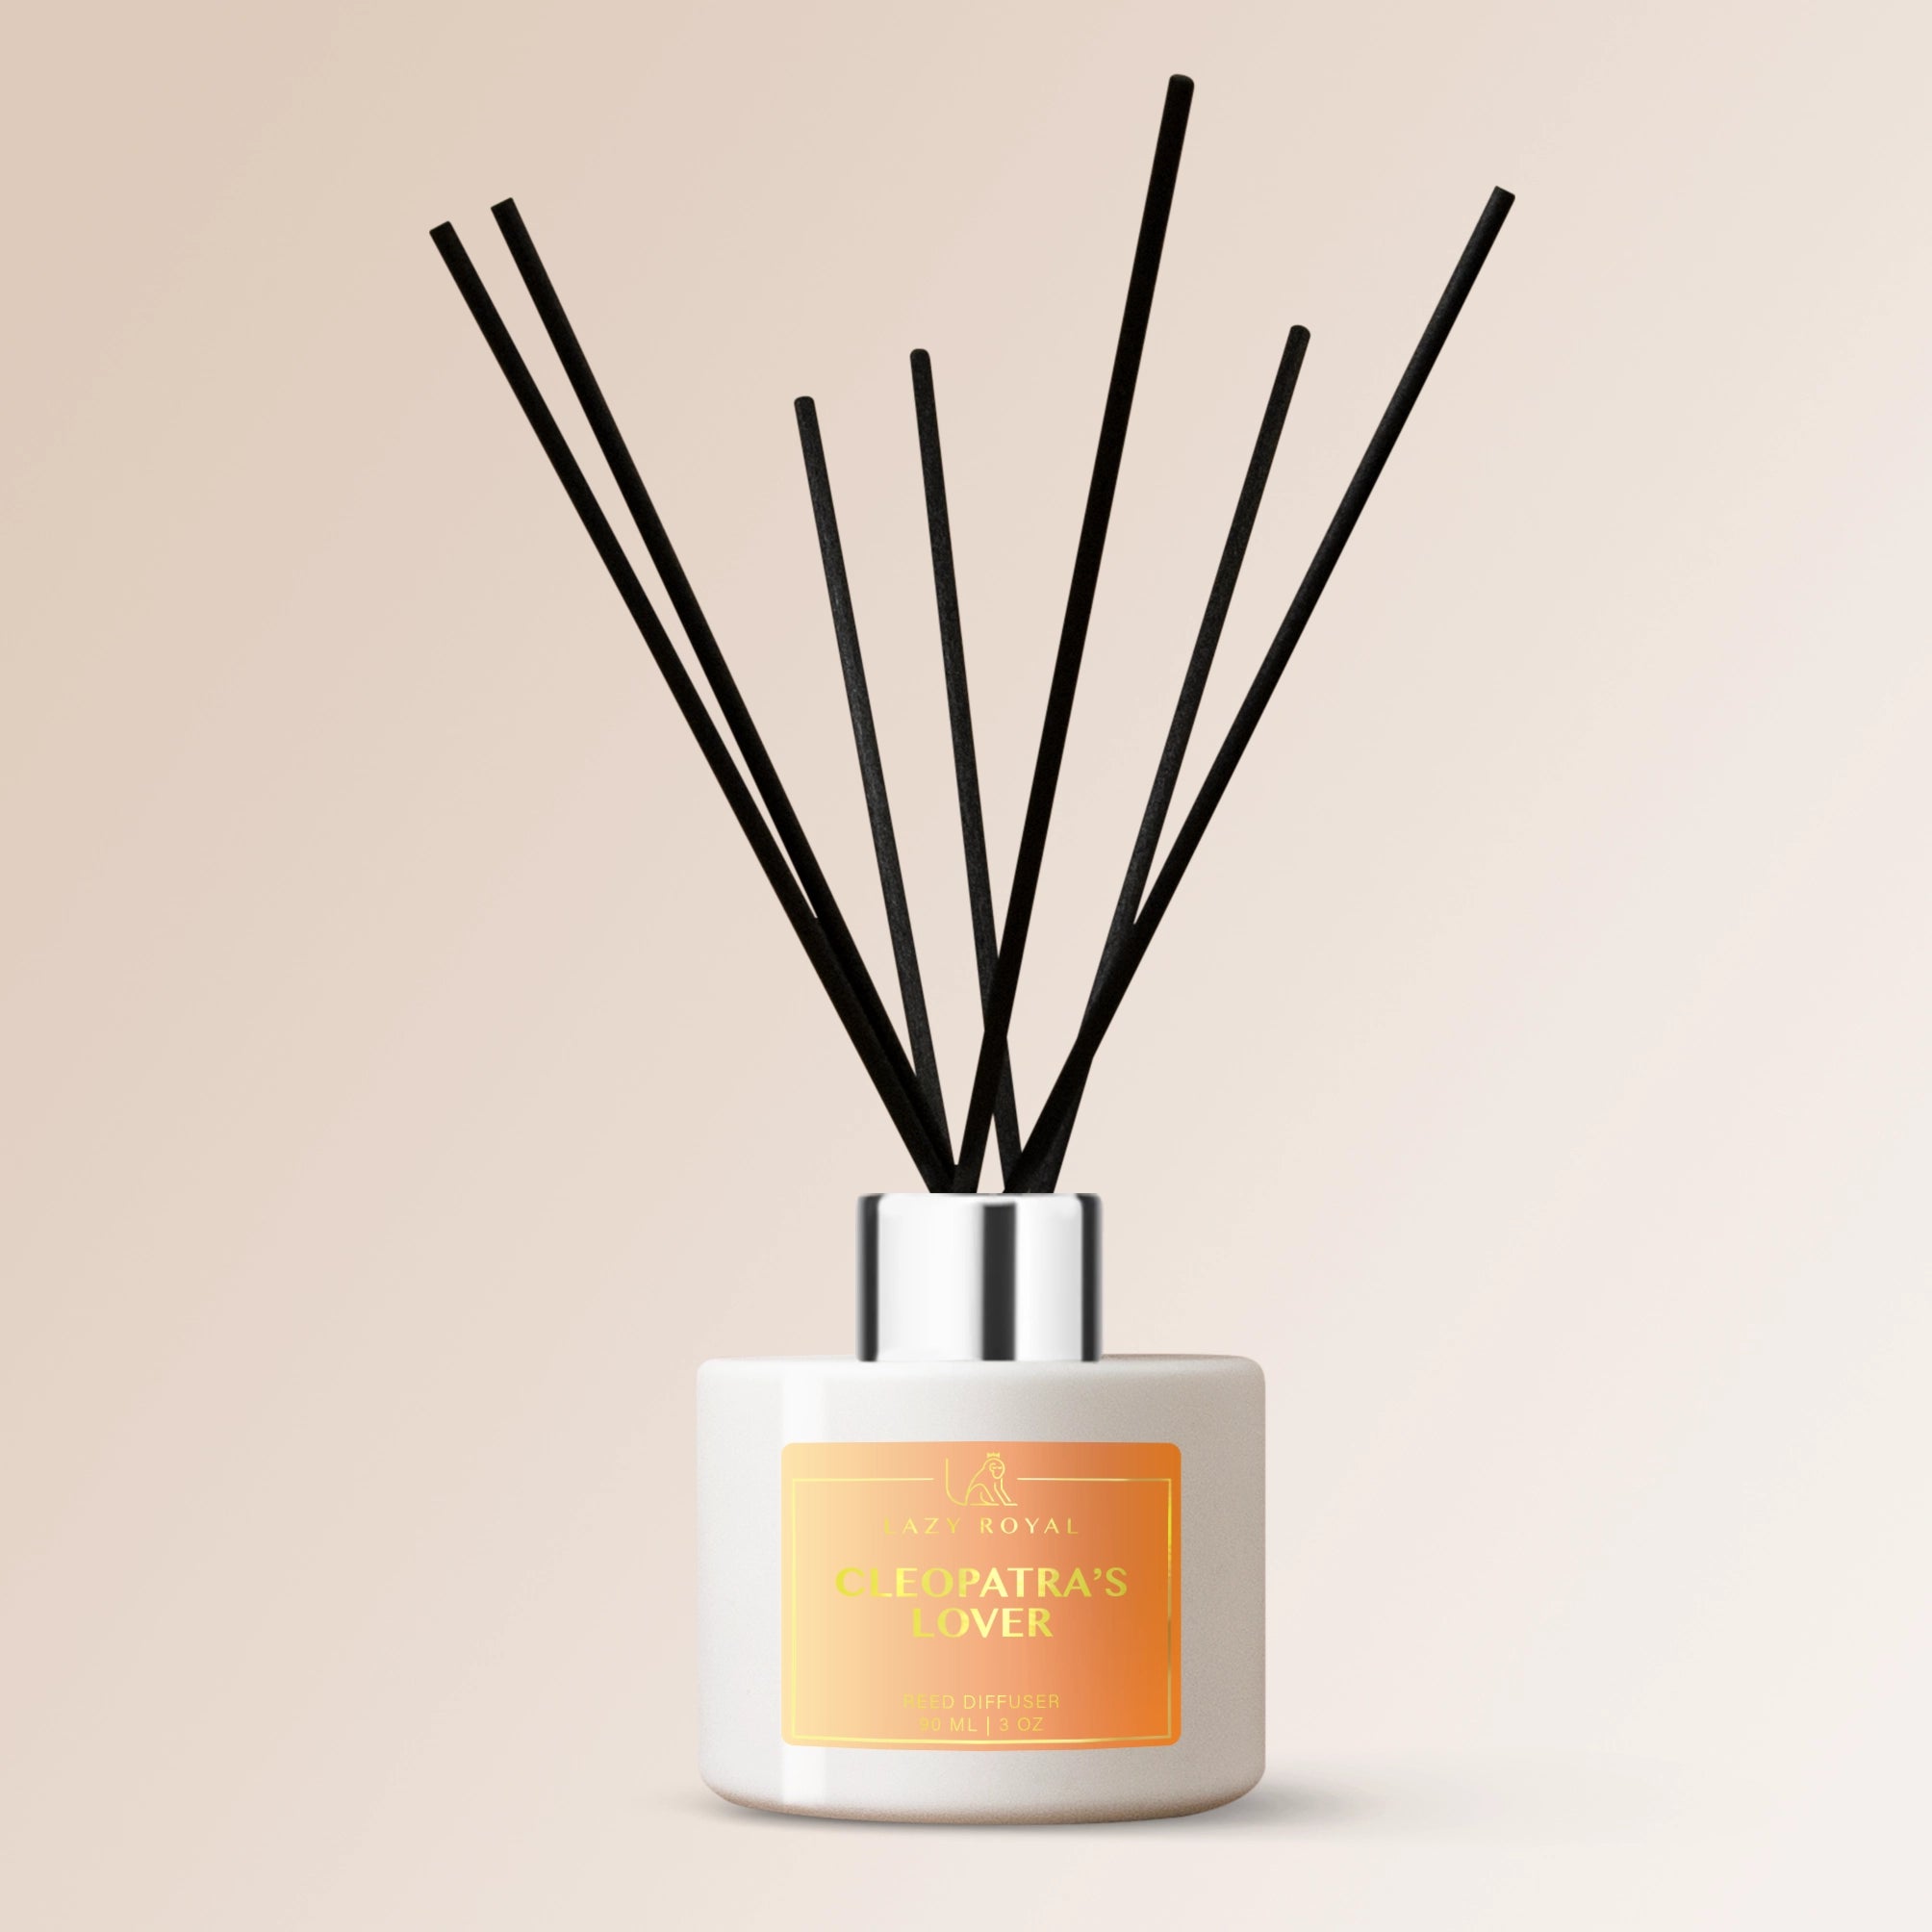 Inspired by Love by Kilian, Don't Be Shy - Cleopatra's Lover Reed Diffuser